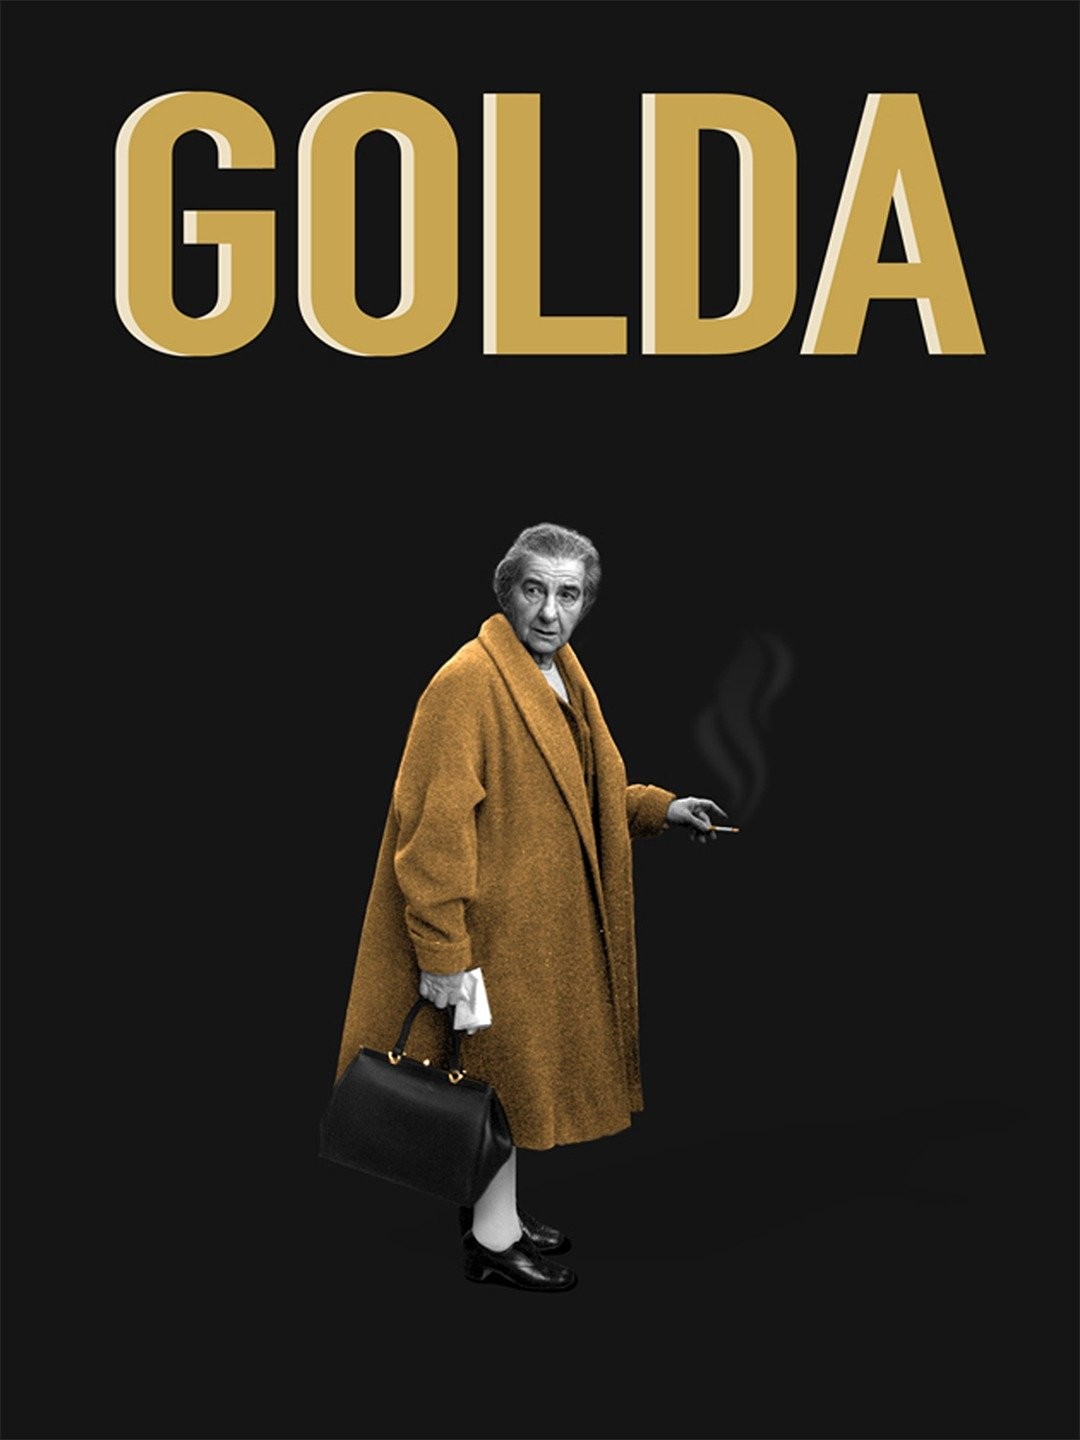 How The 'Golda' Movie Became a Vehicle to Spread Hate